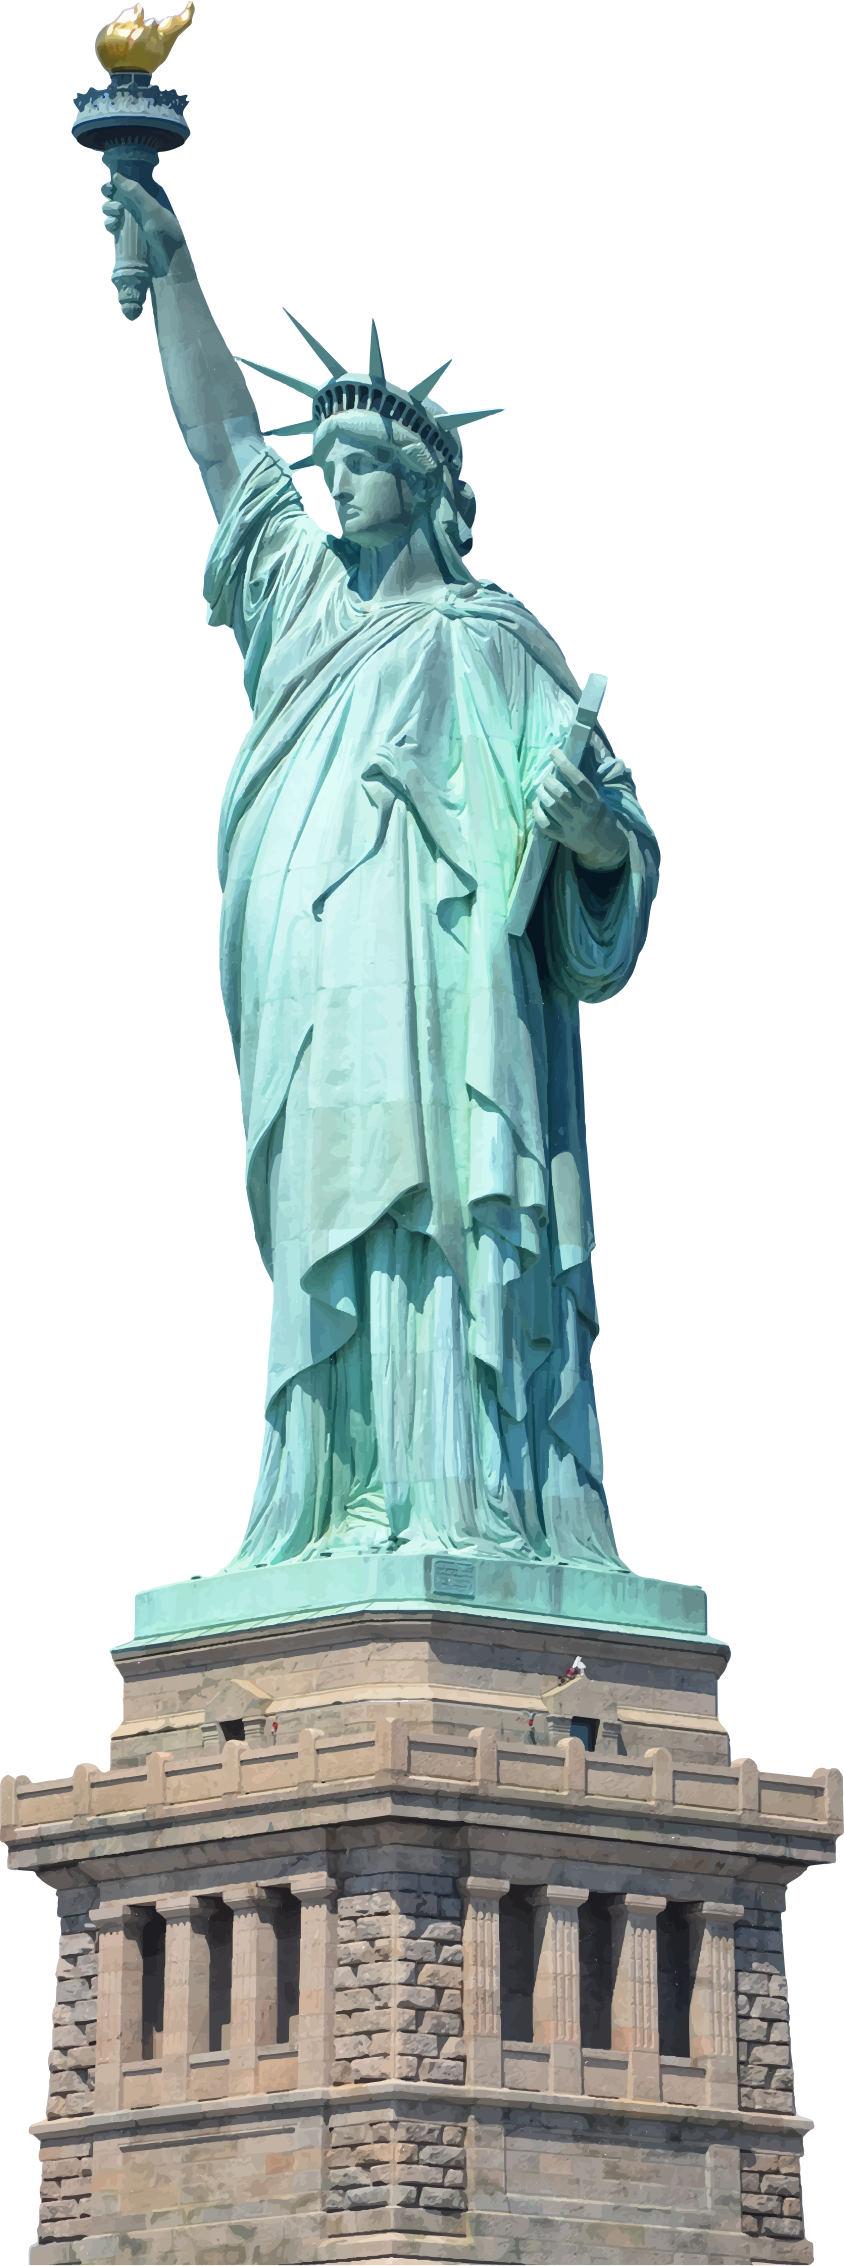 Statue Of Liberty Illustration Download New York Image PNG Transparent